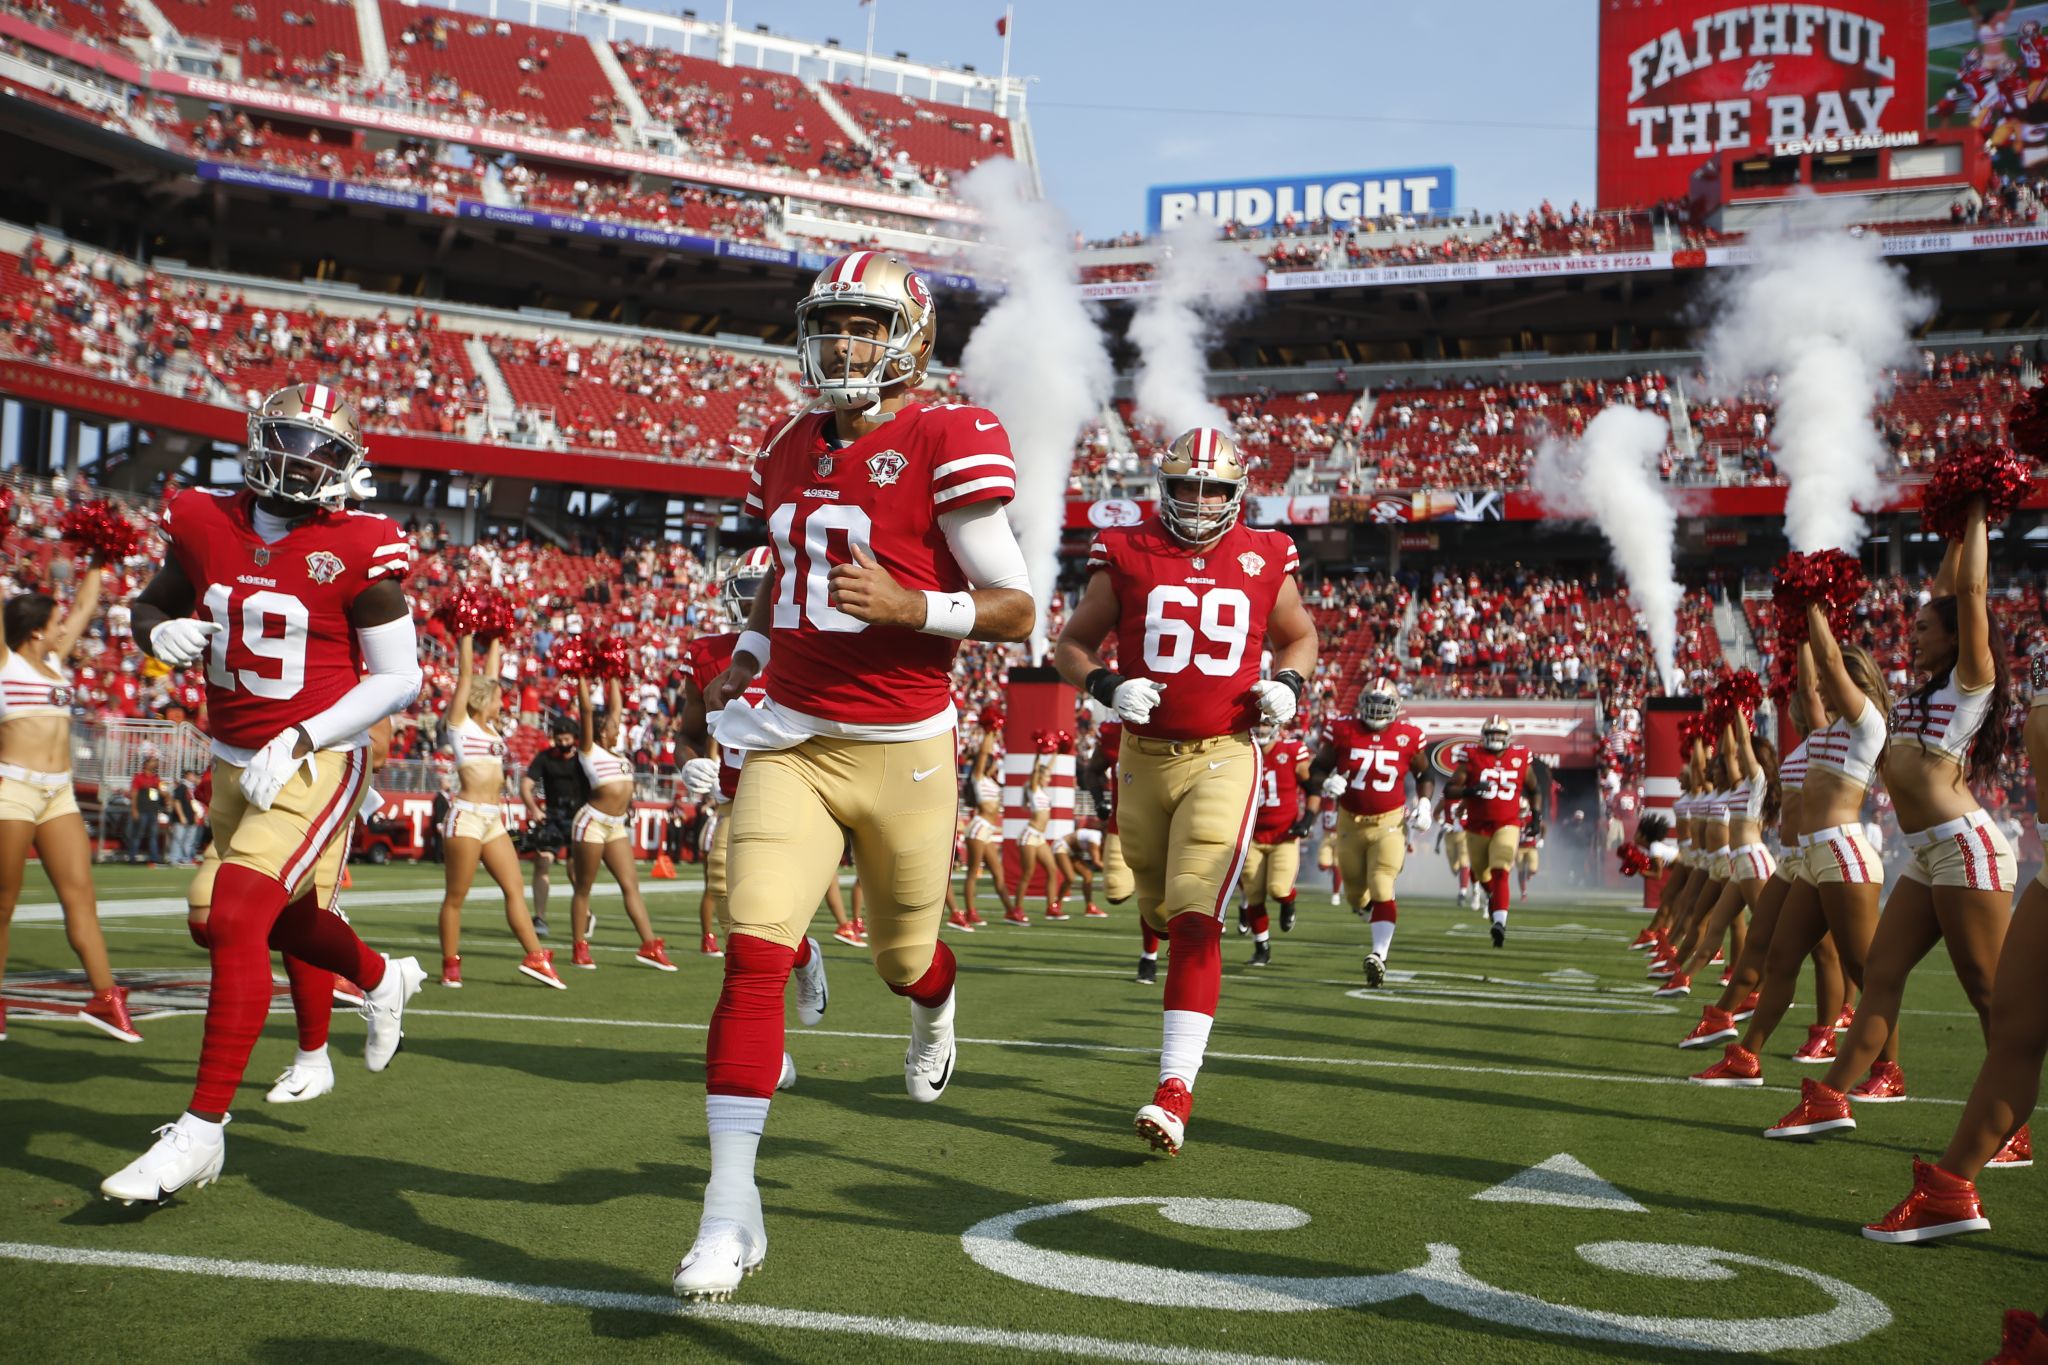 How to stream 49ers games online